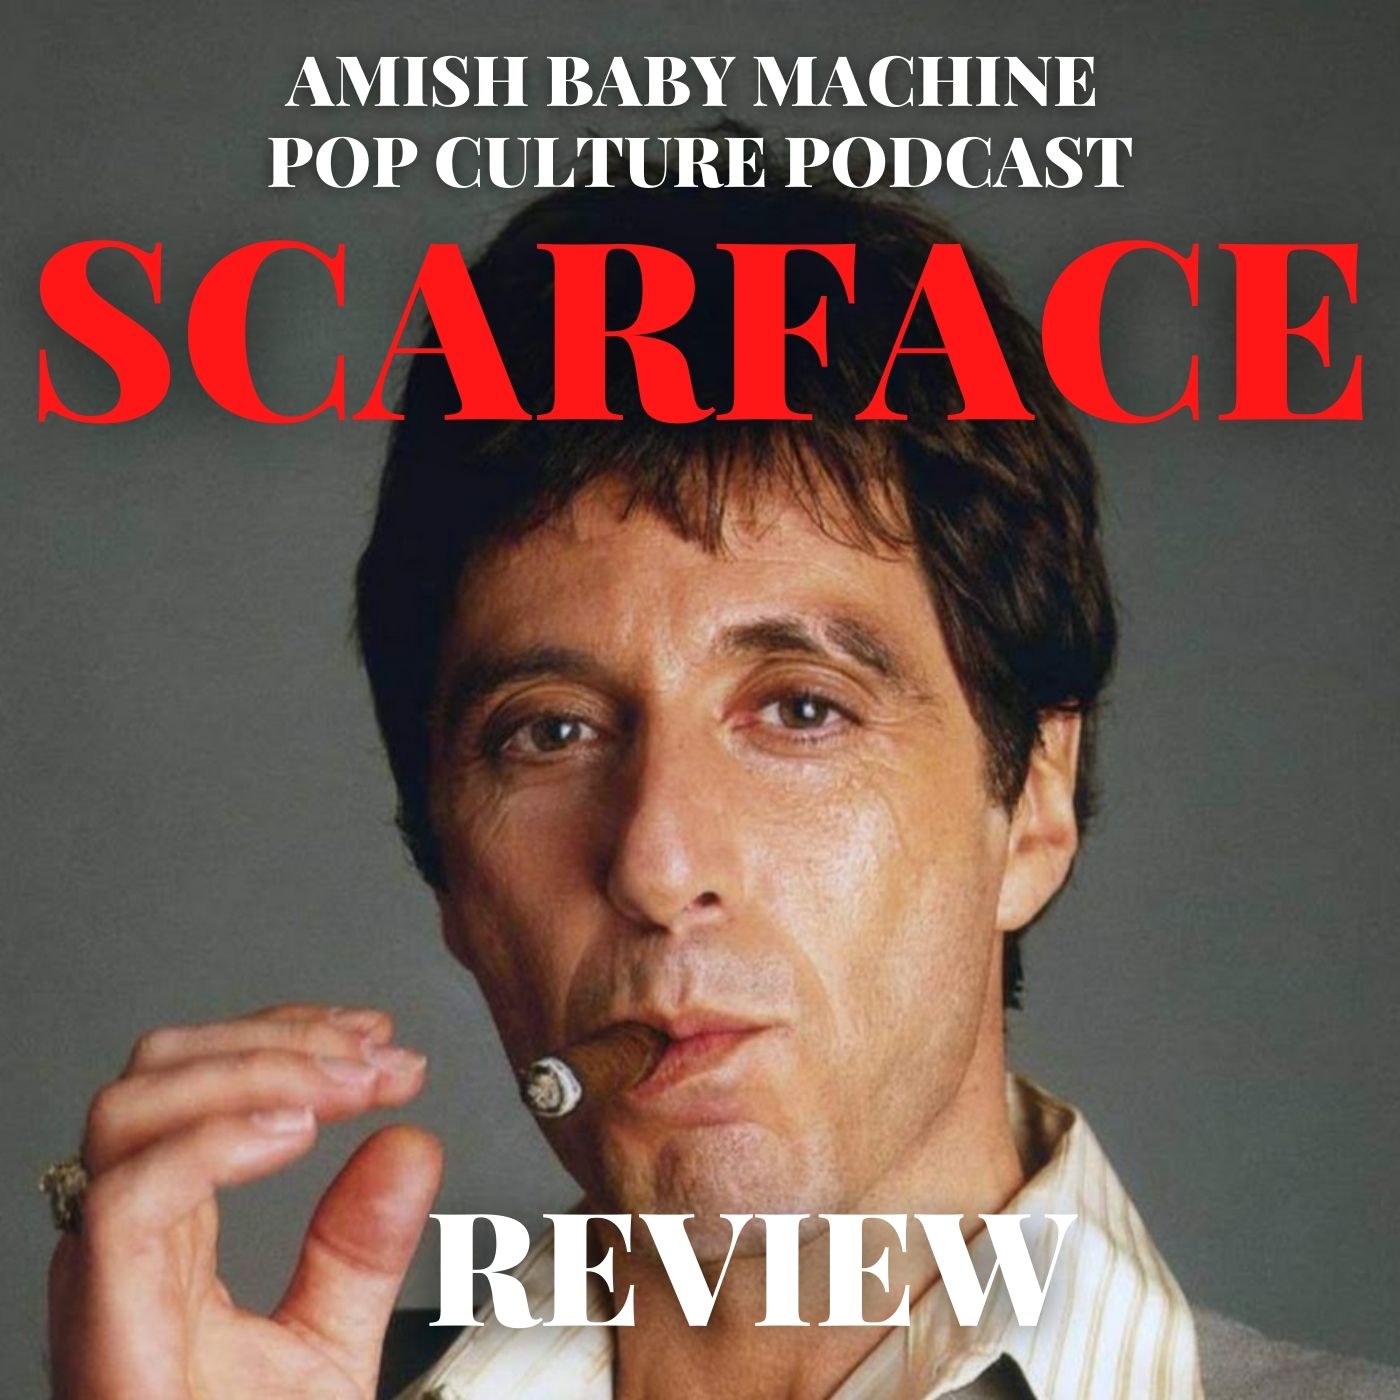 Scarface Review – Amazing Pop Culture Podcast – Podcast – Podtail